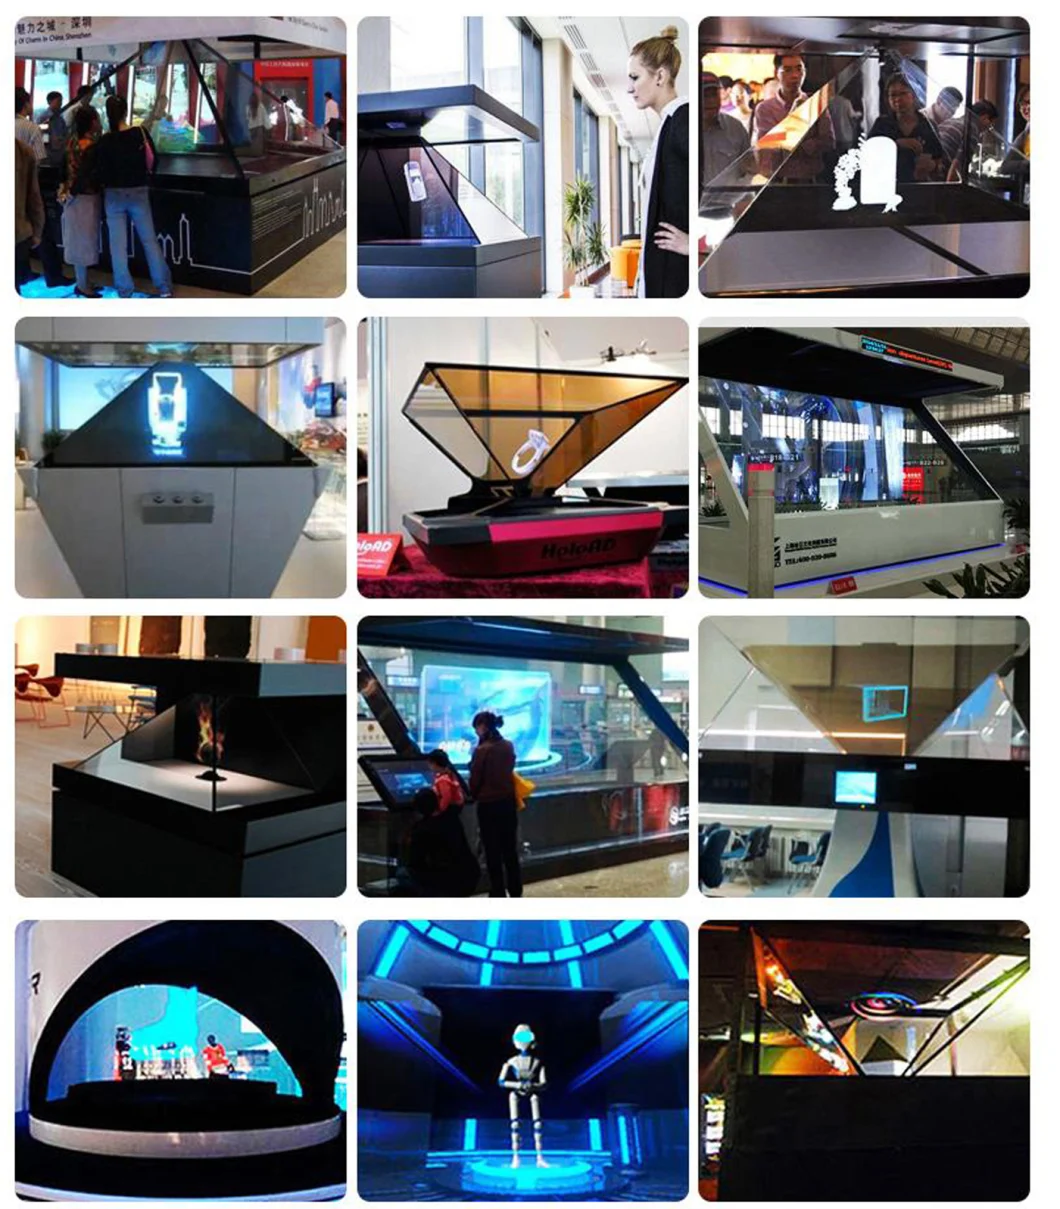 3D Hologram Projector Holographic Glass for Exhibition Halls/ Libraries/Museums/Science/Technology Museums/Archives/Entertainment Halls/Exhibitions/ Expositions